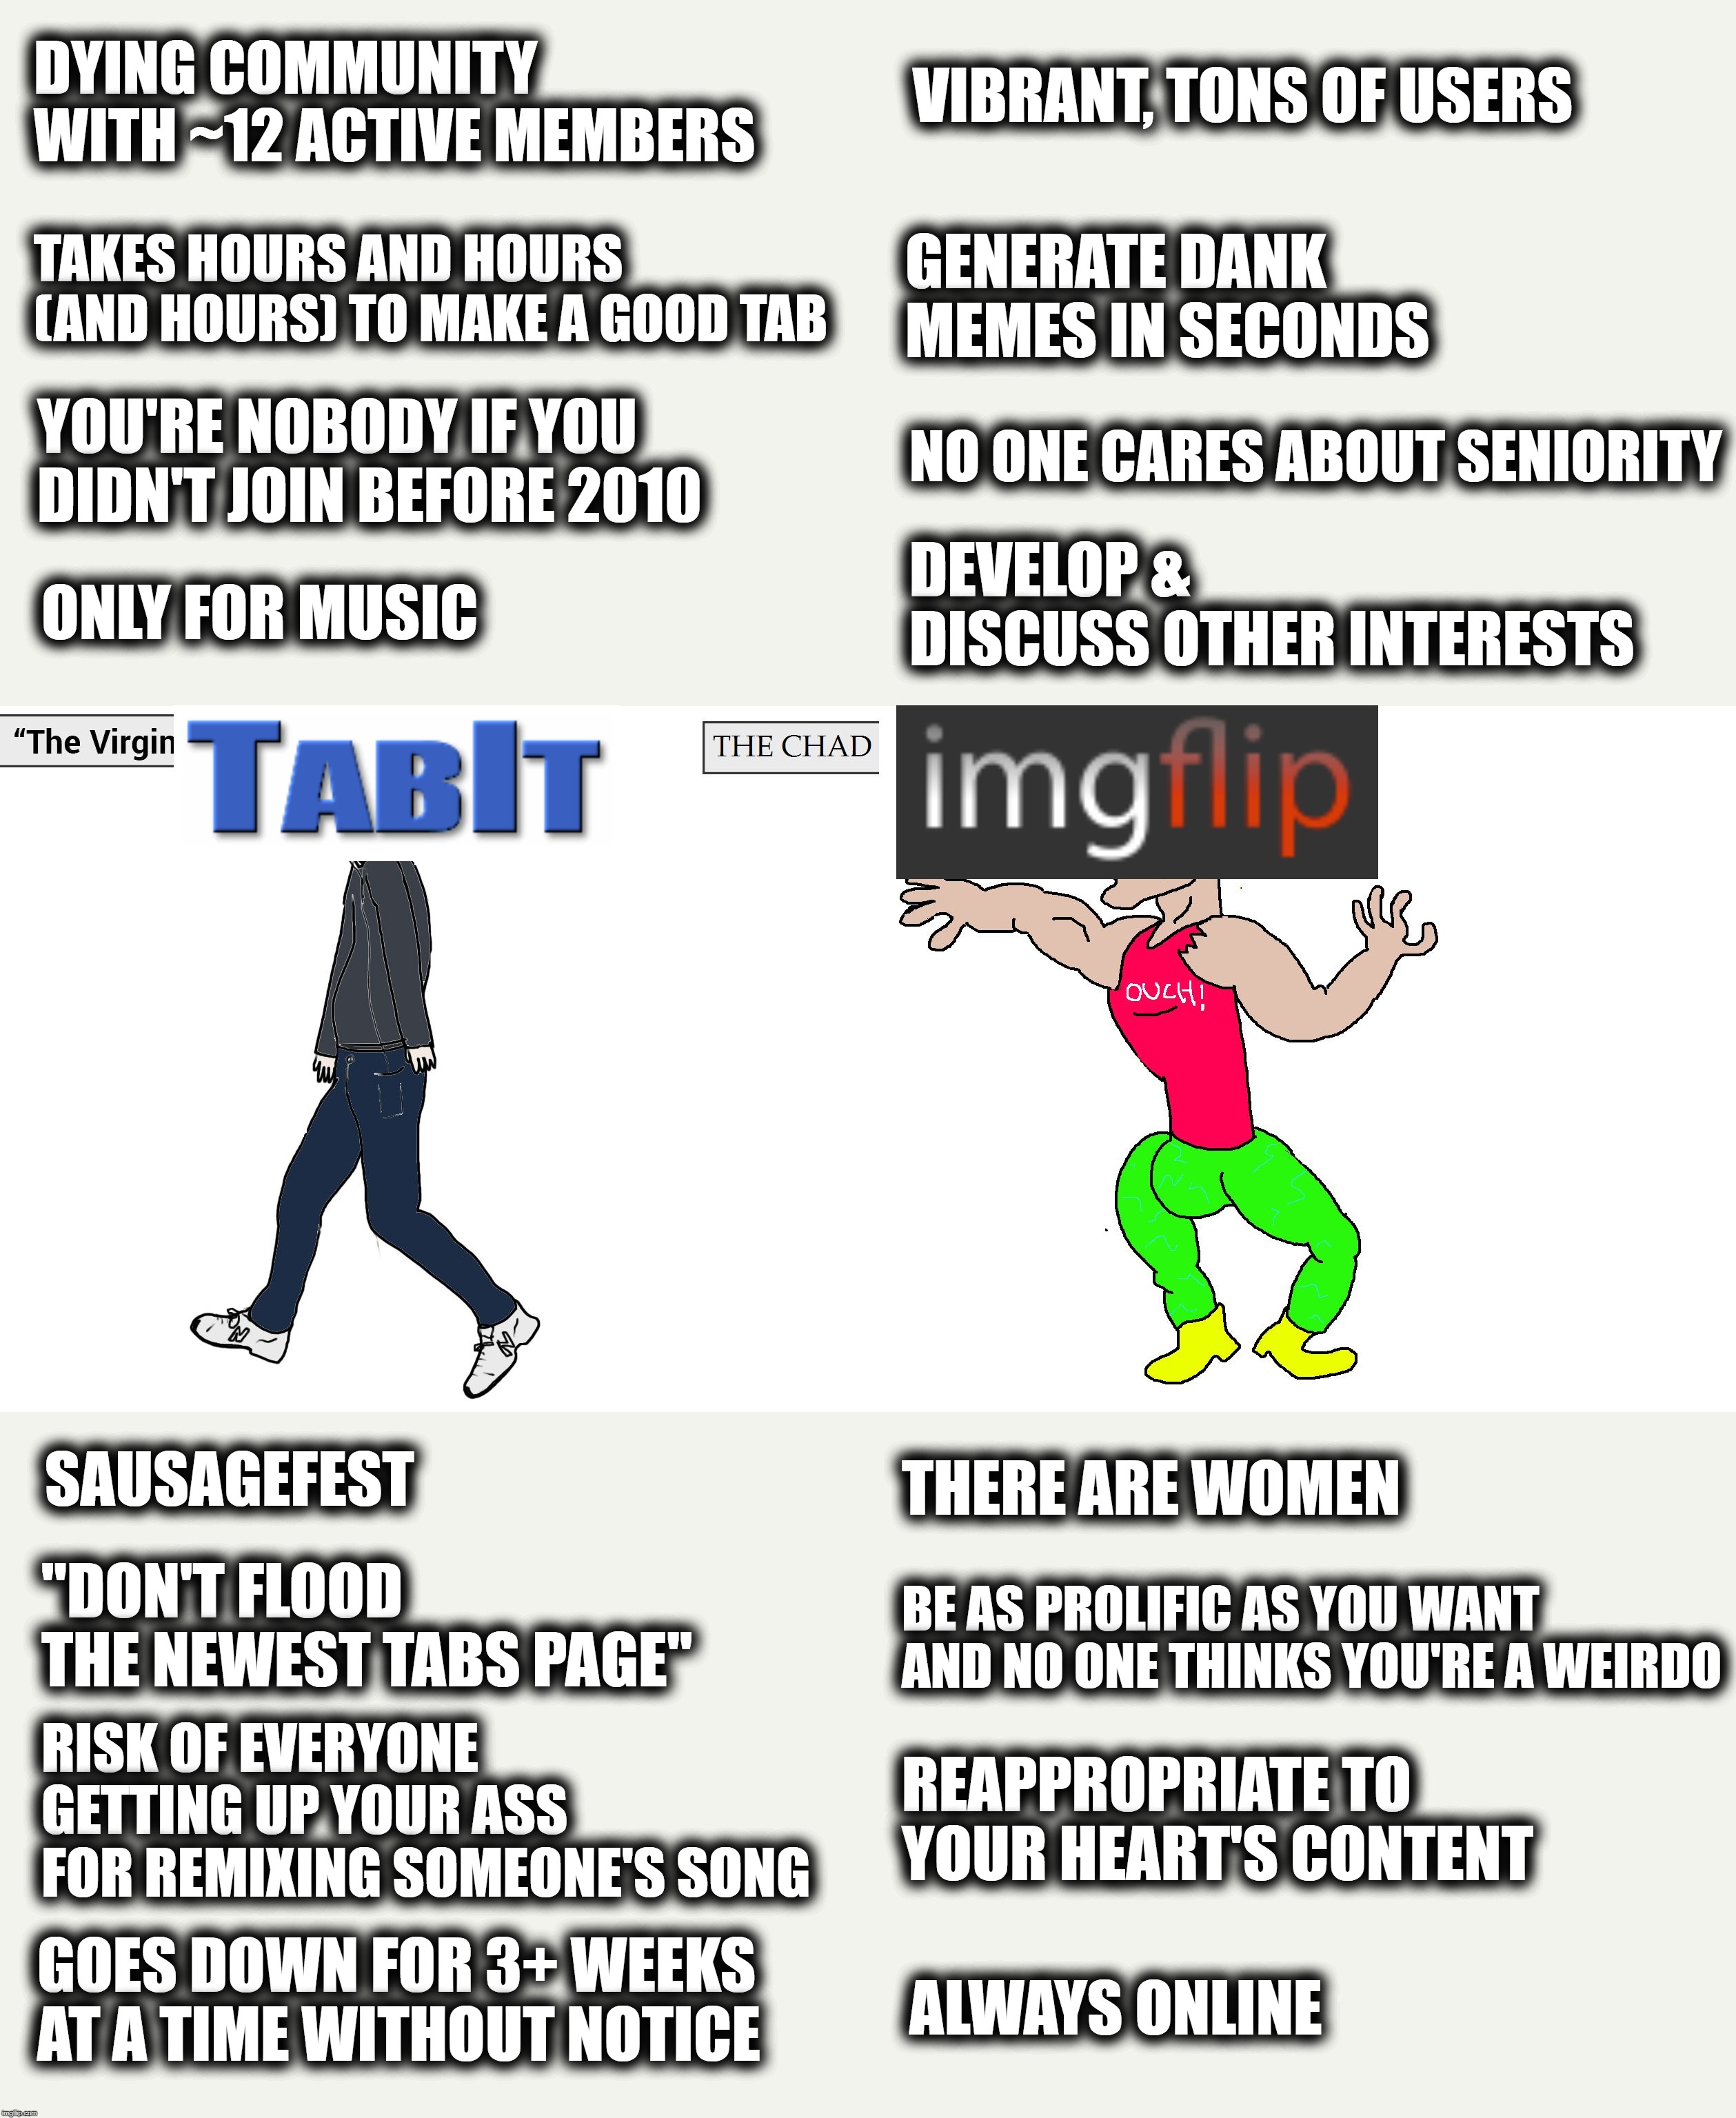 Virgin TabIt vs. Chad ImgFlip |  VIBRANT, TONS OF USERS; DYING COMMUNITY WITH ~12 ACTIVE MEMBERS; TAKES HOURS AND HOURS (AND HOURS) TO MAKE A GOOD TAB; GENERATE DANK MEMES IN SECONDS; NO ONE CARES ABOUT SENIORITY; YOU'RE NOBODY IF YOU DIDN'T JOIN BEFORE 2010; DEVELOP & DISCUSS OTHER INTERESTS; ONLY FOR MUSIC; SAUSAGEFEST; THERE ARE WOMEN; "DON'T FLOOD THE NEWEST TABS PAGE"; BE AS PROLIFIC AS YOU WANT AND NO ONE THINKS YOU'RE A WEIRDO; RISK OF EVERYONE GETTING UP YOUR ASS FOR REMIXING SOMEONE'S SONG; REAPPROPRIATE TO YOUR HEART'S CONTENT; GOES DOWN FOR 3+ WEEKS AT A TIME WITHOUT NOTICE; ALWAYS ONLINE | image tagged in virgin and chad,imgflip,imgflip community,welcome to imgflip,music,guitar | made w/ Imgflip meme maker